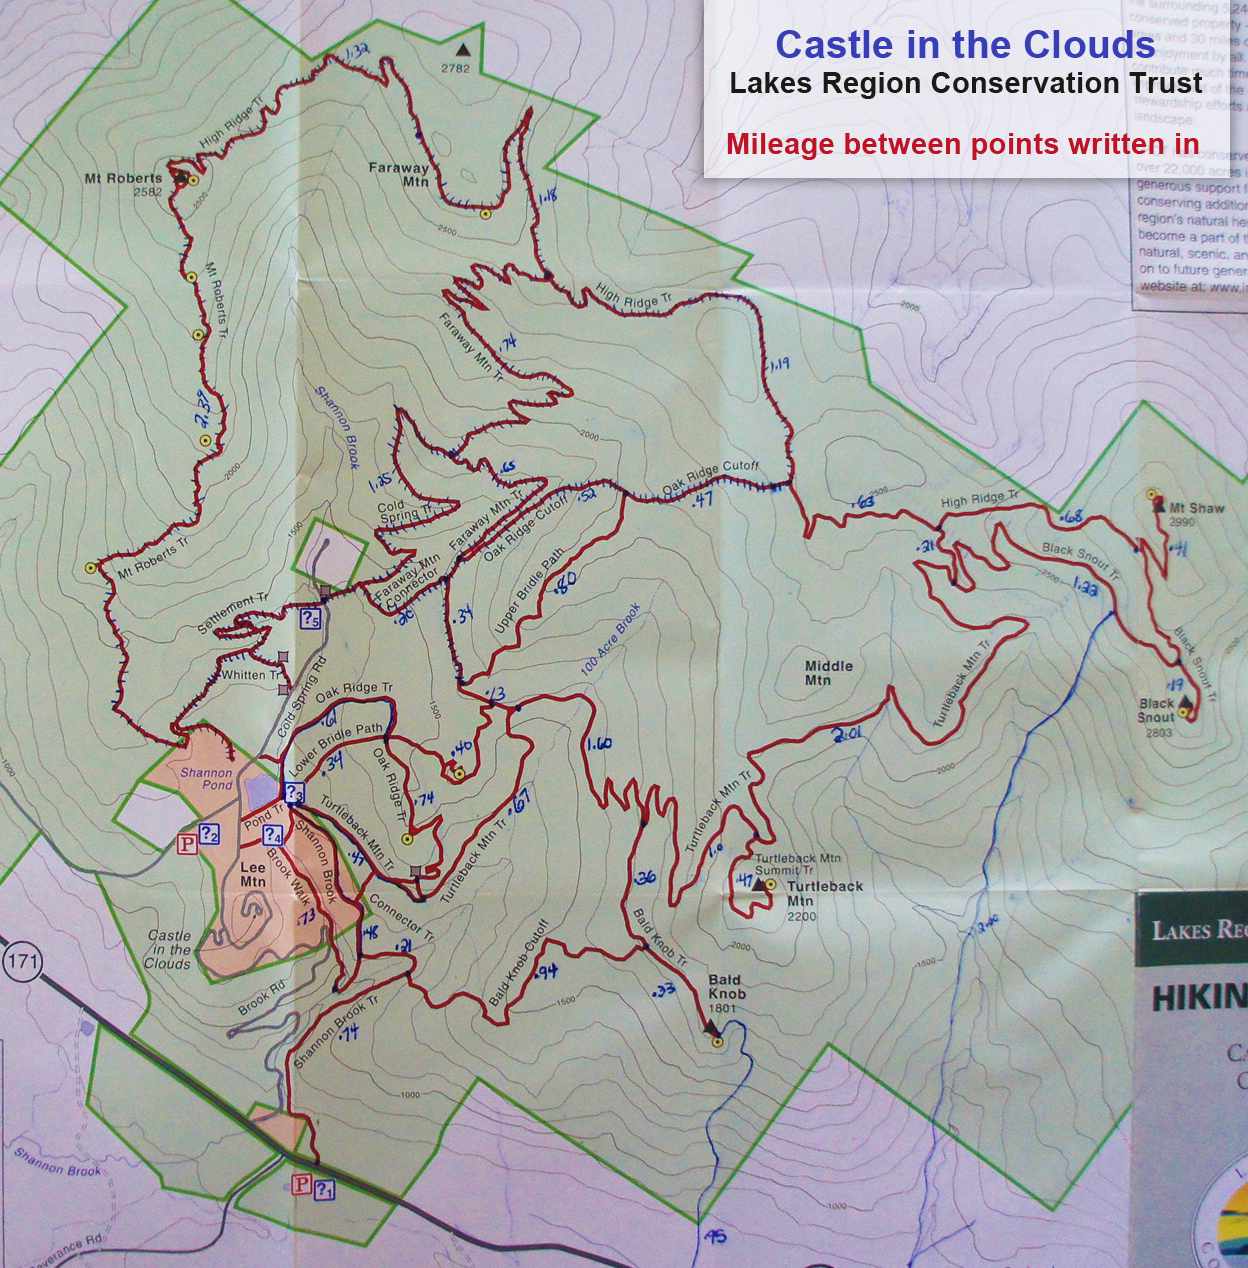 map trail hiking hike castle in the clouds lakes region conservation trust mount shaw high ridge trail shaw trail faraway mountain mount roberts black snout big ball mountain tate mountain mount roberts trail bald knob cut off shannon brook trail turtleback mountain trail lee mountain shannon pond 171 moltonborough nh new hampshire 52 with a view 52 wav 52wav lrct patch upper bridle path oak ridge cutoff faraway mountain connector cold spring settlement trail whitten trail cold spring trail